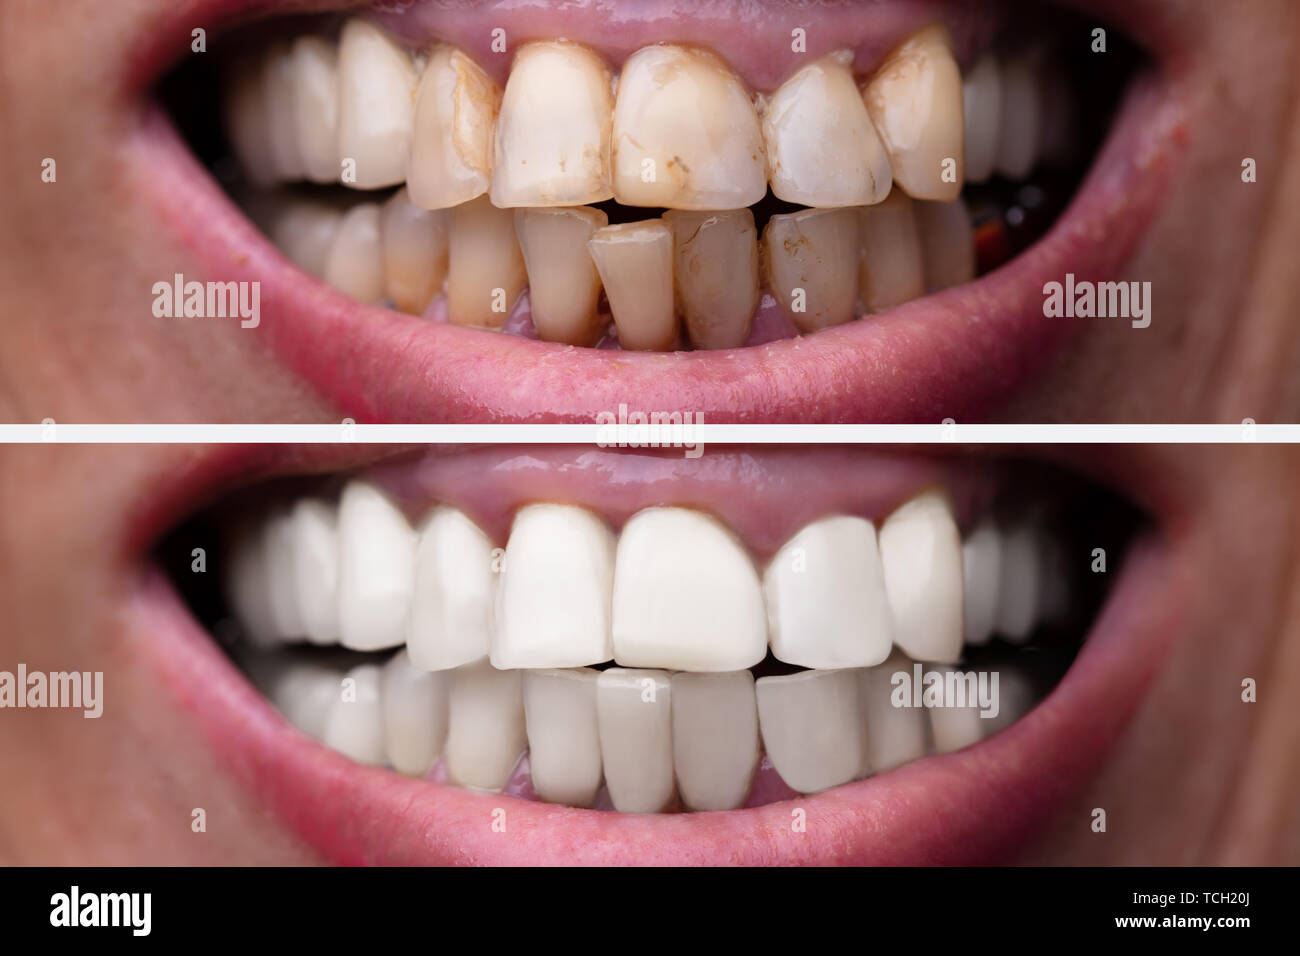 Female Teeth Between Before And After Dental Treatment Stock Photo